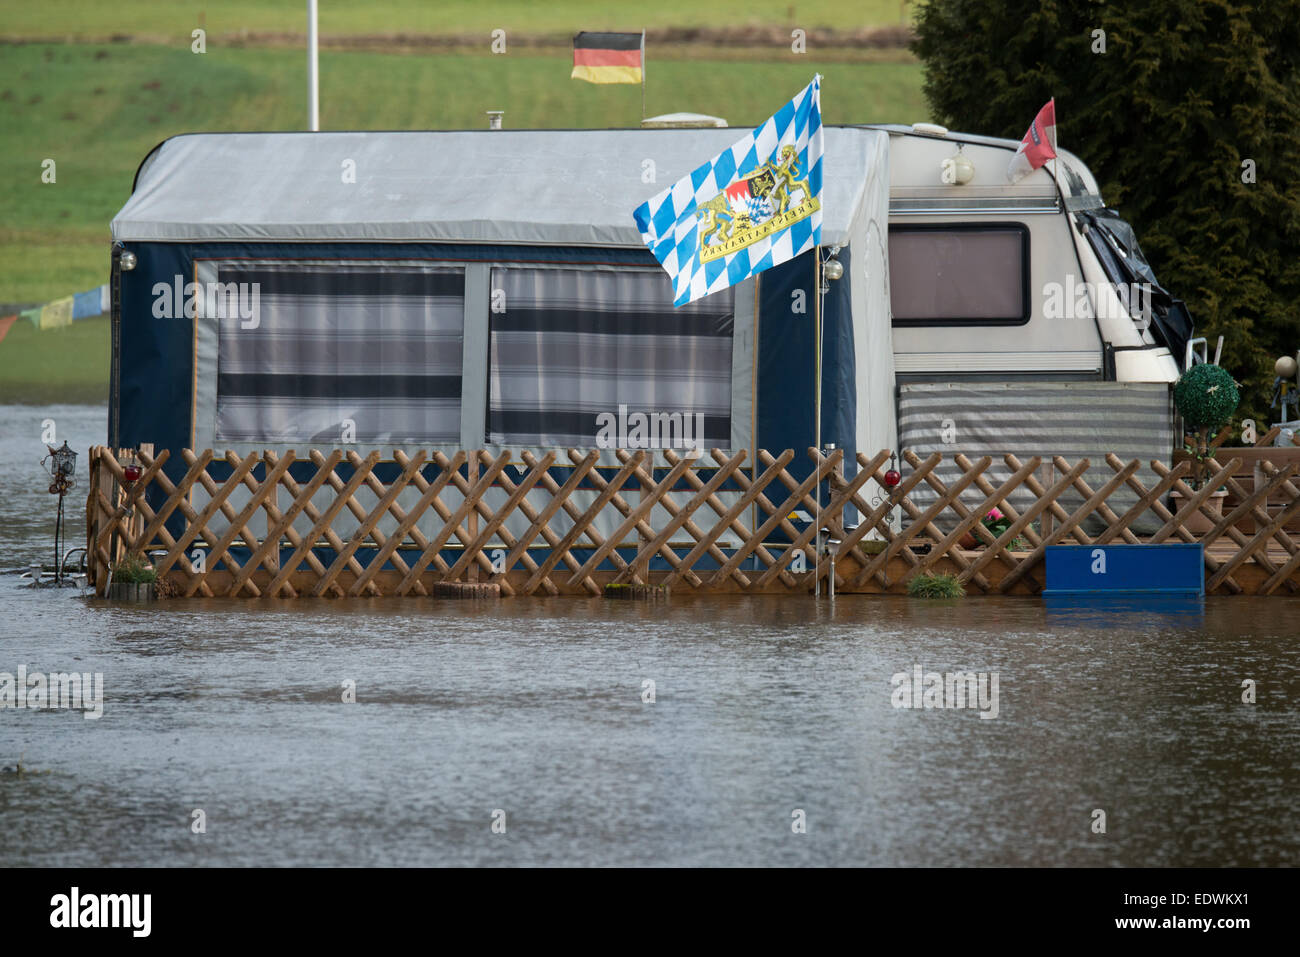 Bad Koetzting, Germany. 10th Jan, 2015. A trailer stands on a campsite flooded by the Weisser Regen river in Bad Koetzting, Germany, 10 January 2015. First floodings occured in Northern and Eastern Bavaria. For the weekend, the German Meteorological Service has announced more thaw. PHOTO: ARMIN WEIGEL/dpa/Alamy Live News Stock Photo